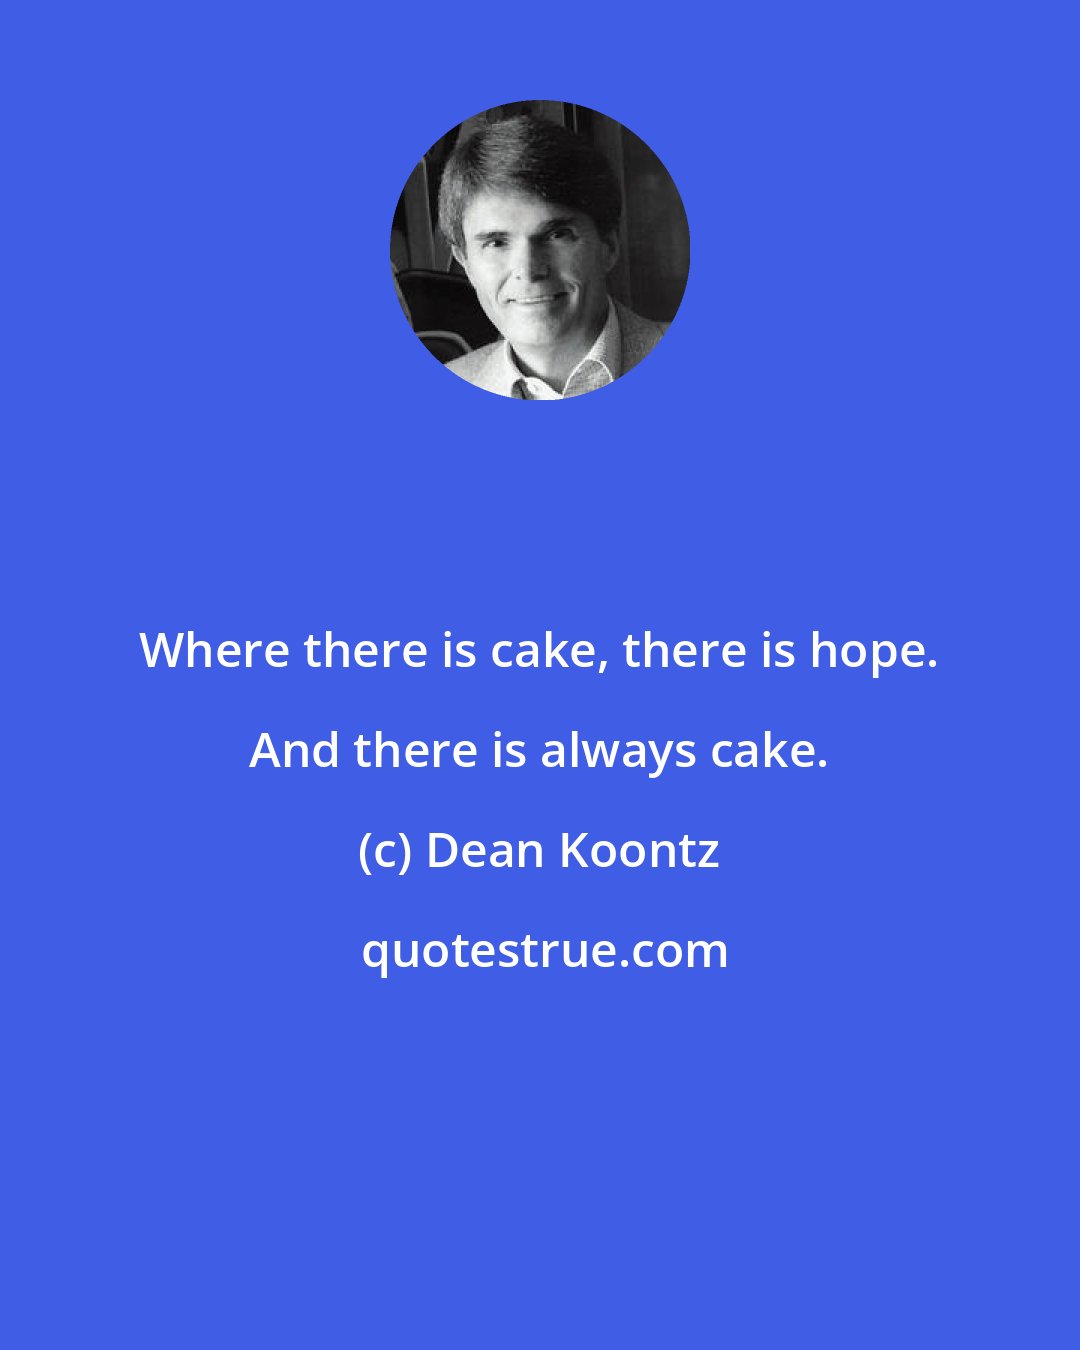 Dean Koontz: Where there is cake, there is hope. And there is always cake.